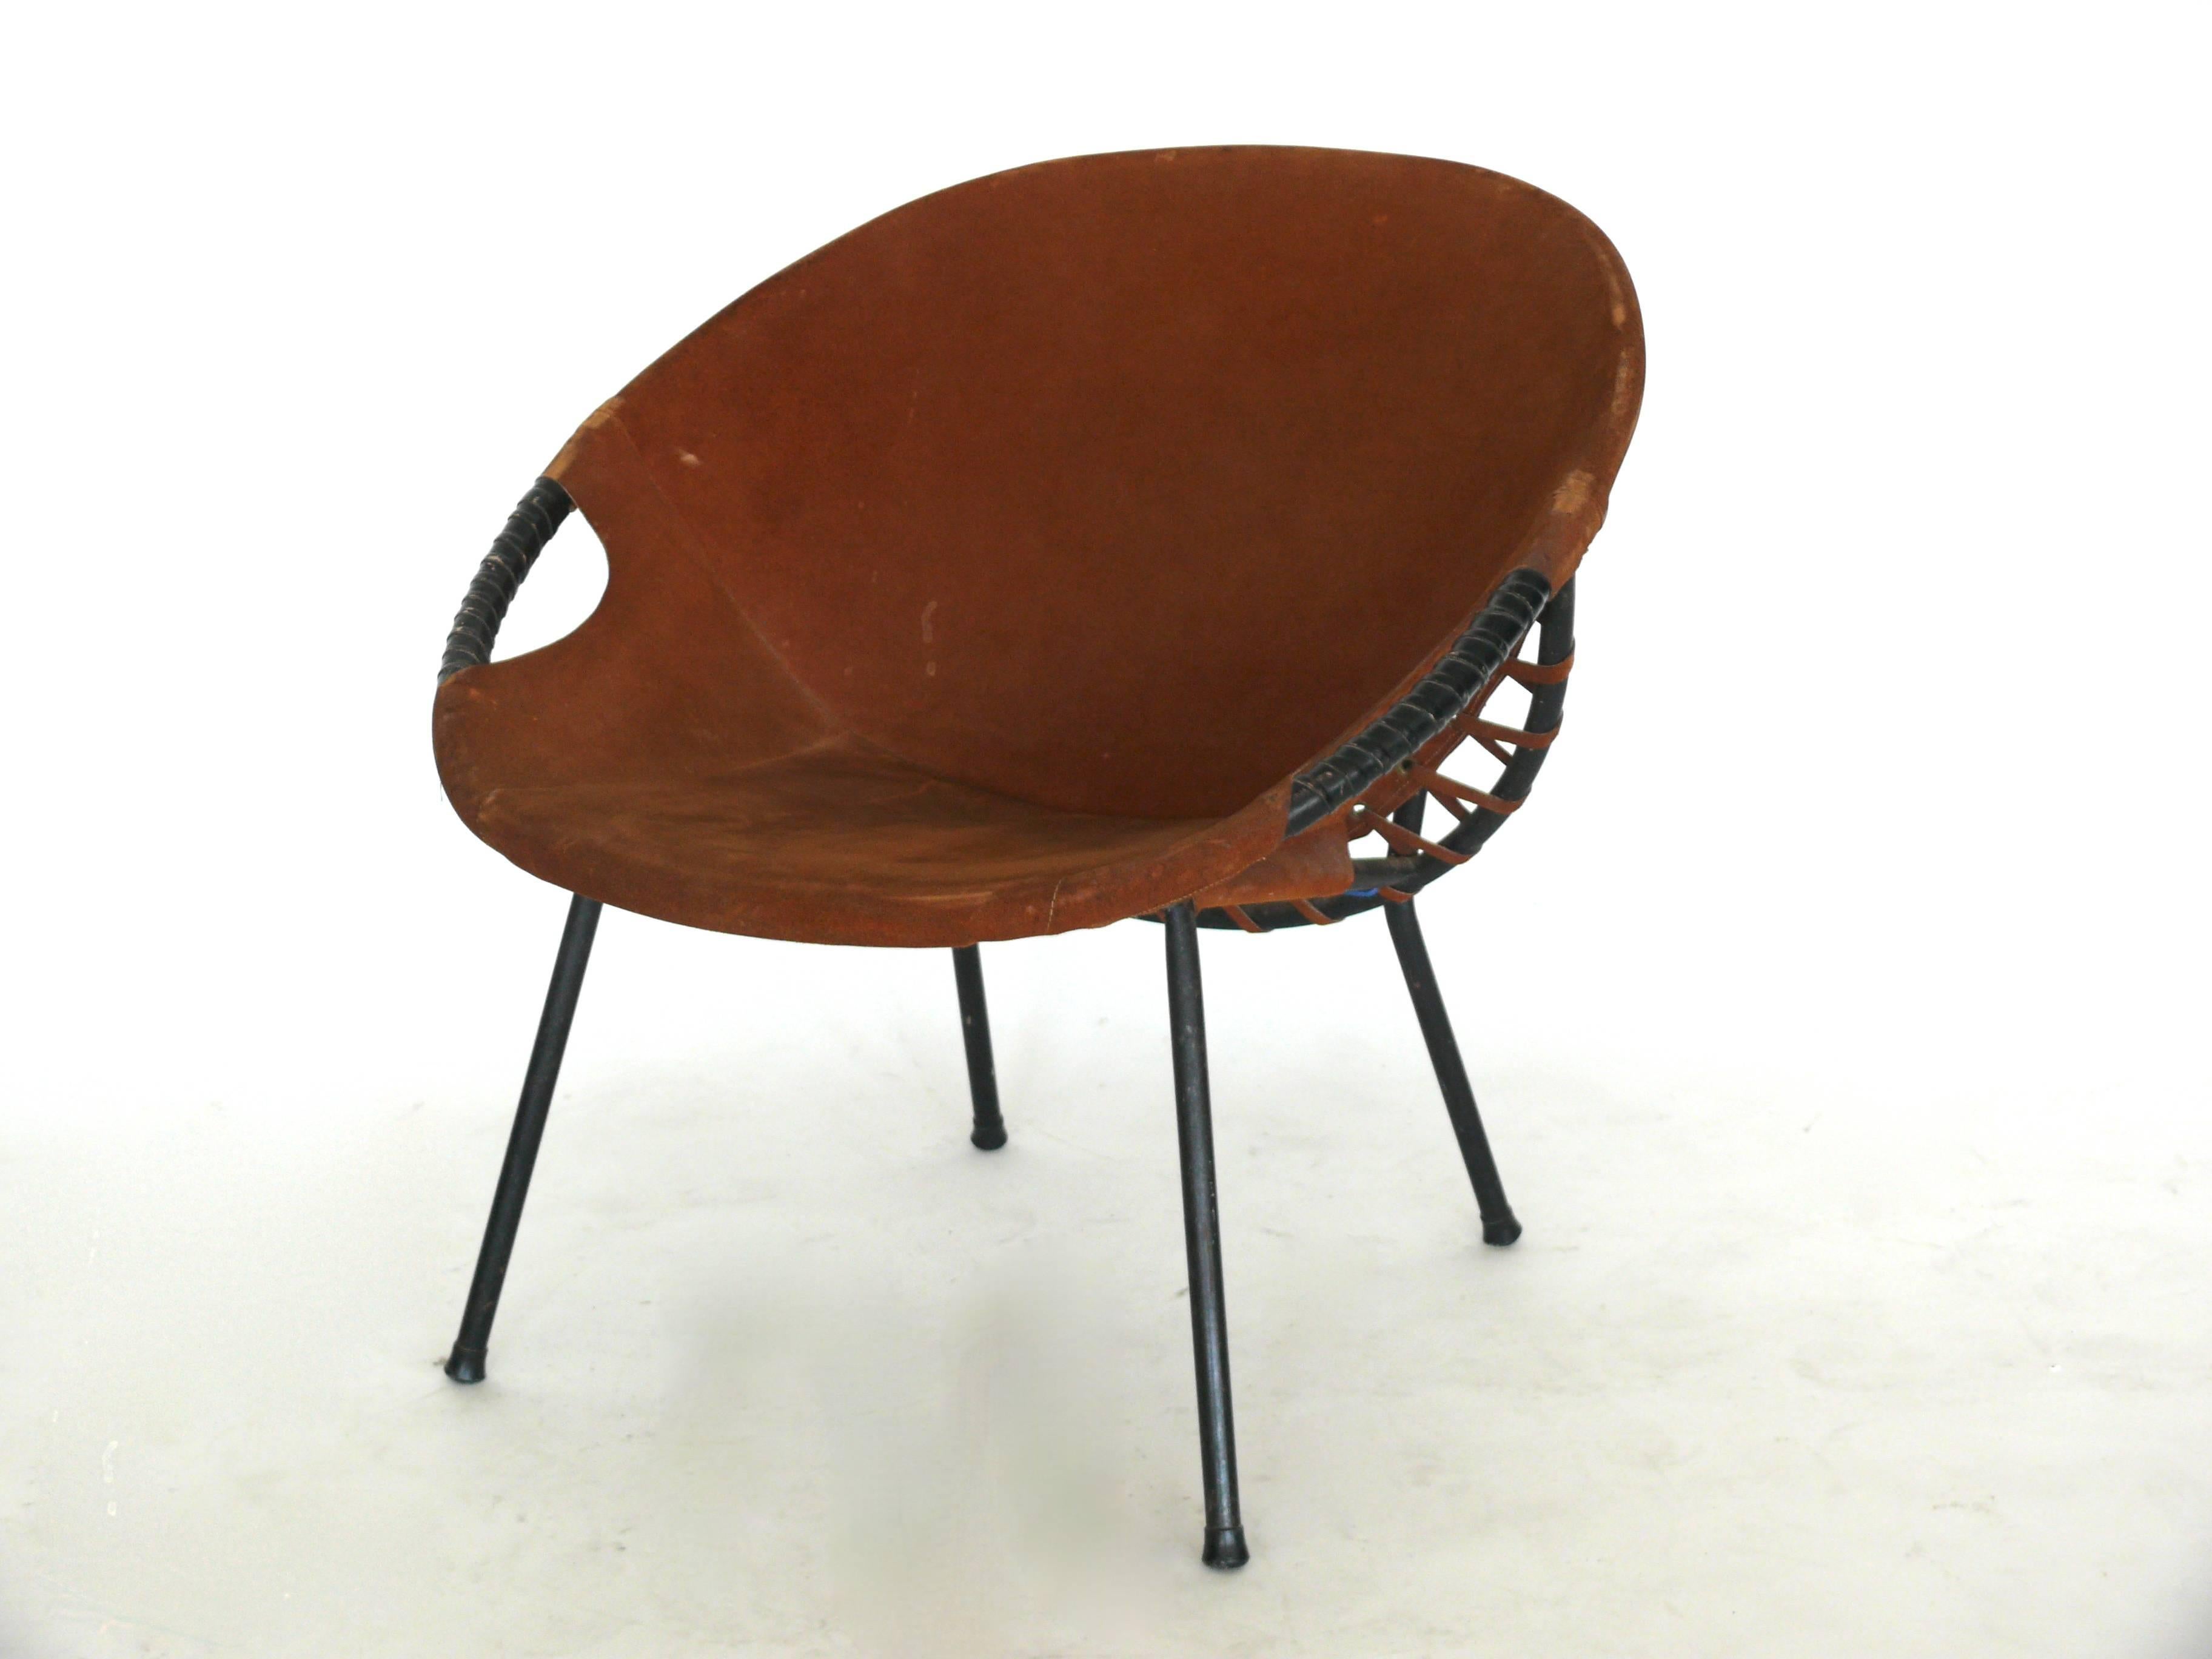 Late 20th Century Austrian Iron and Suede Scoop Chair